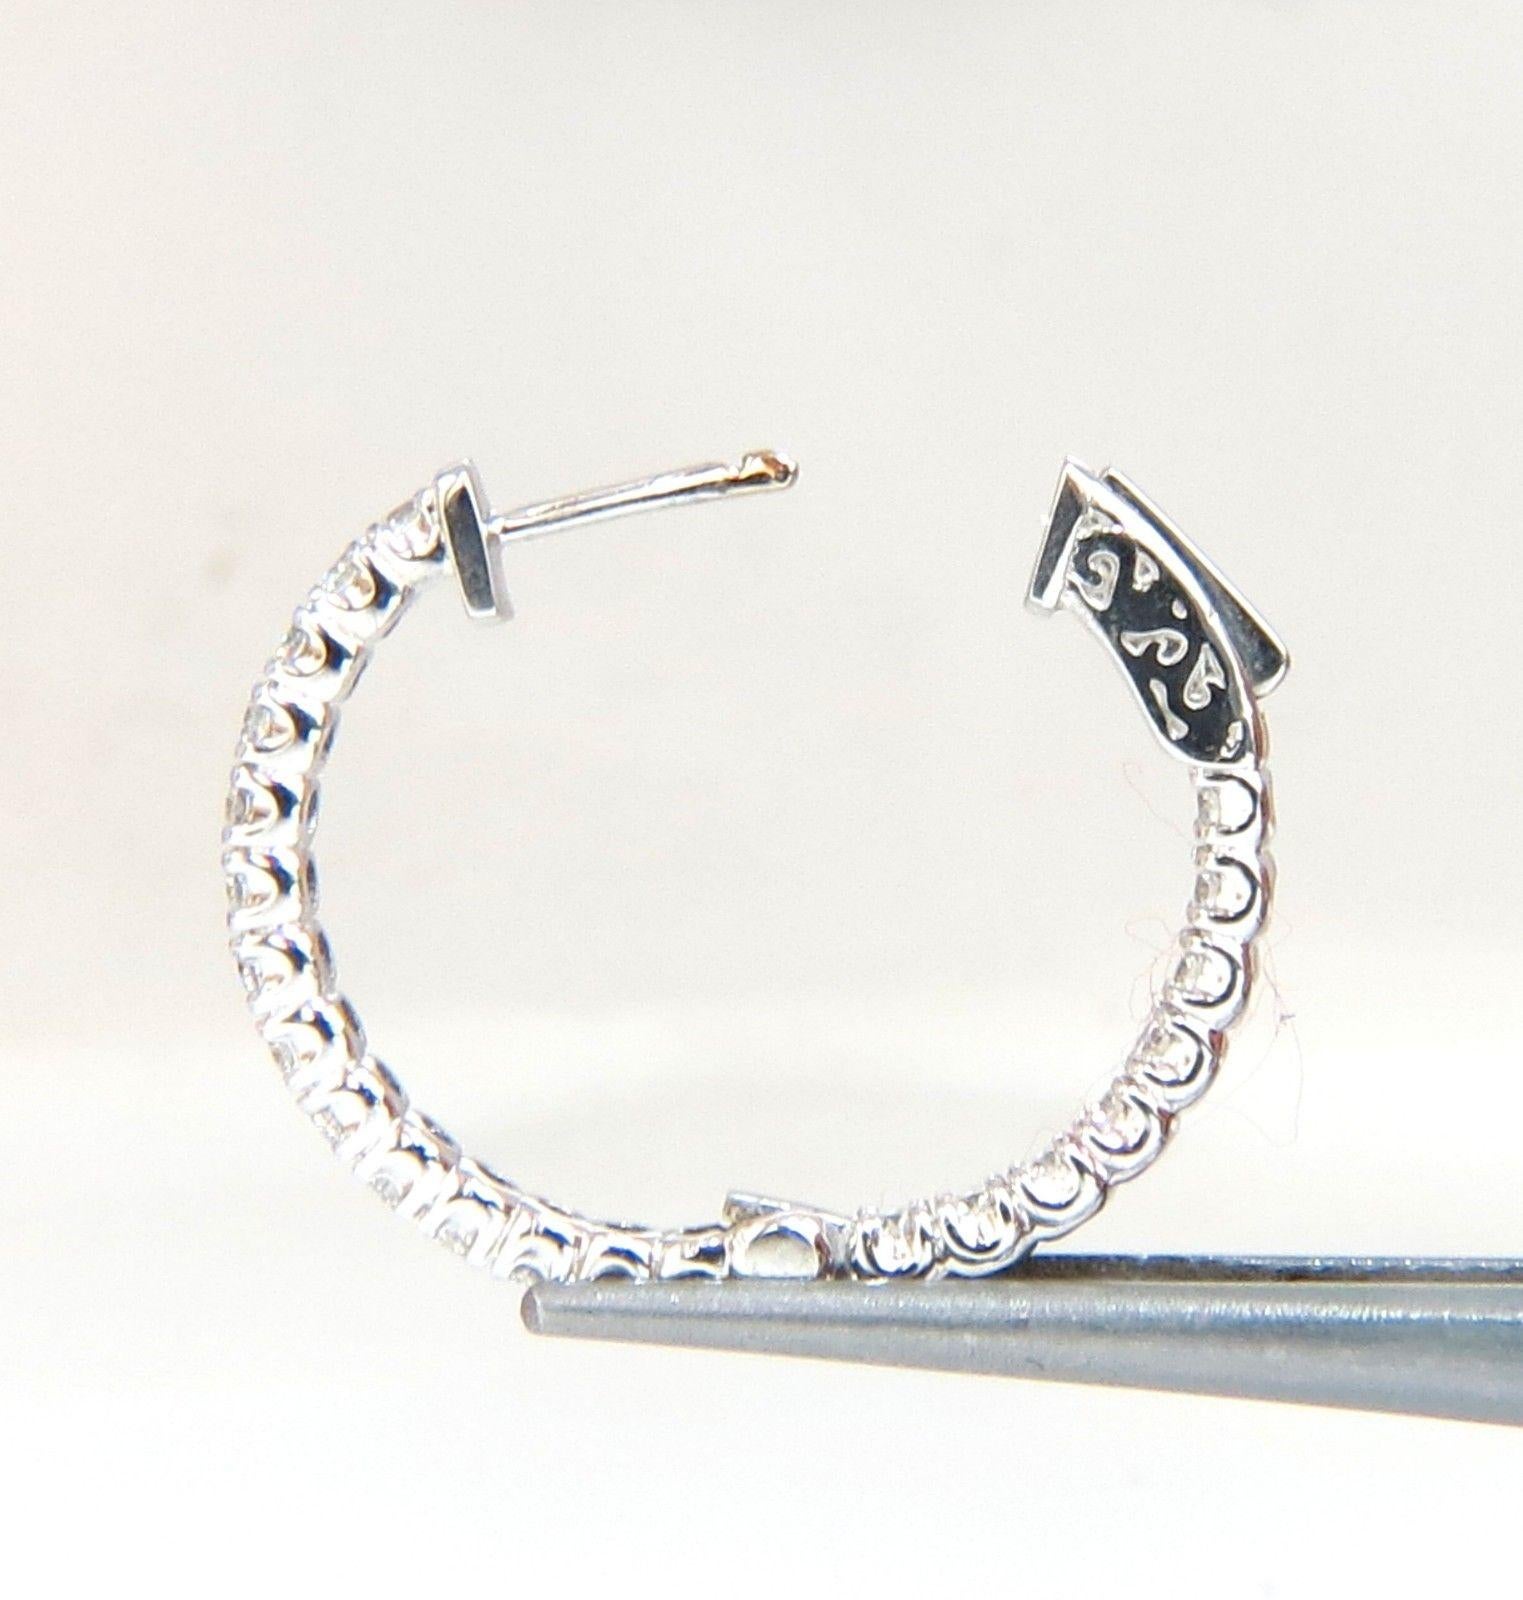 Mid size / Modern, In & Out.

Elongated & wide

1.52ct. Natural Round, Brilliant diamonds hoop earrings.

G color, VS-2 clarity

Full cuts, great sparkle.

1 inch Diameter

 6.5 grams.

14kt. white gold. 

Button press Locking & open

$8000